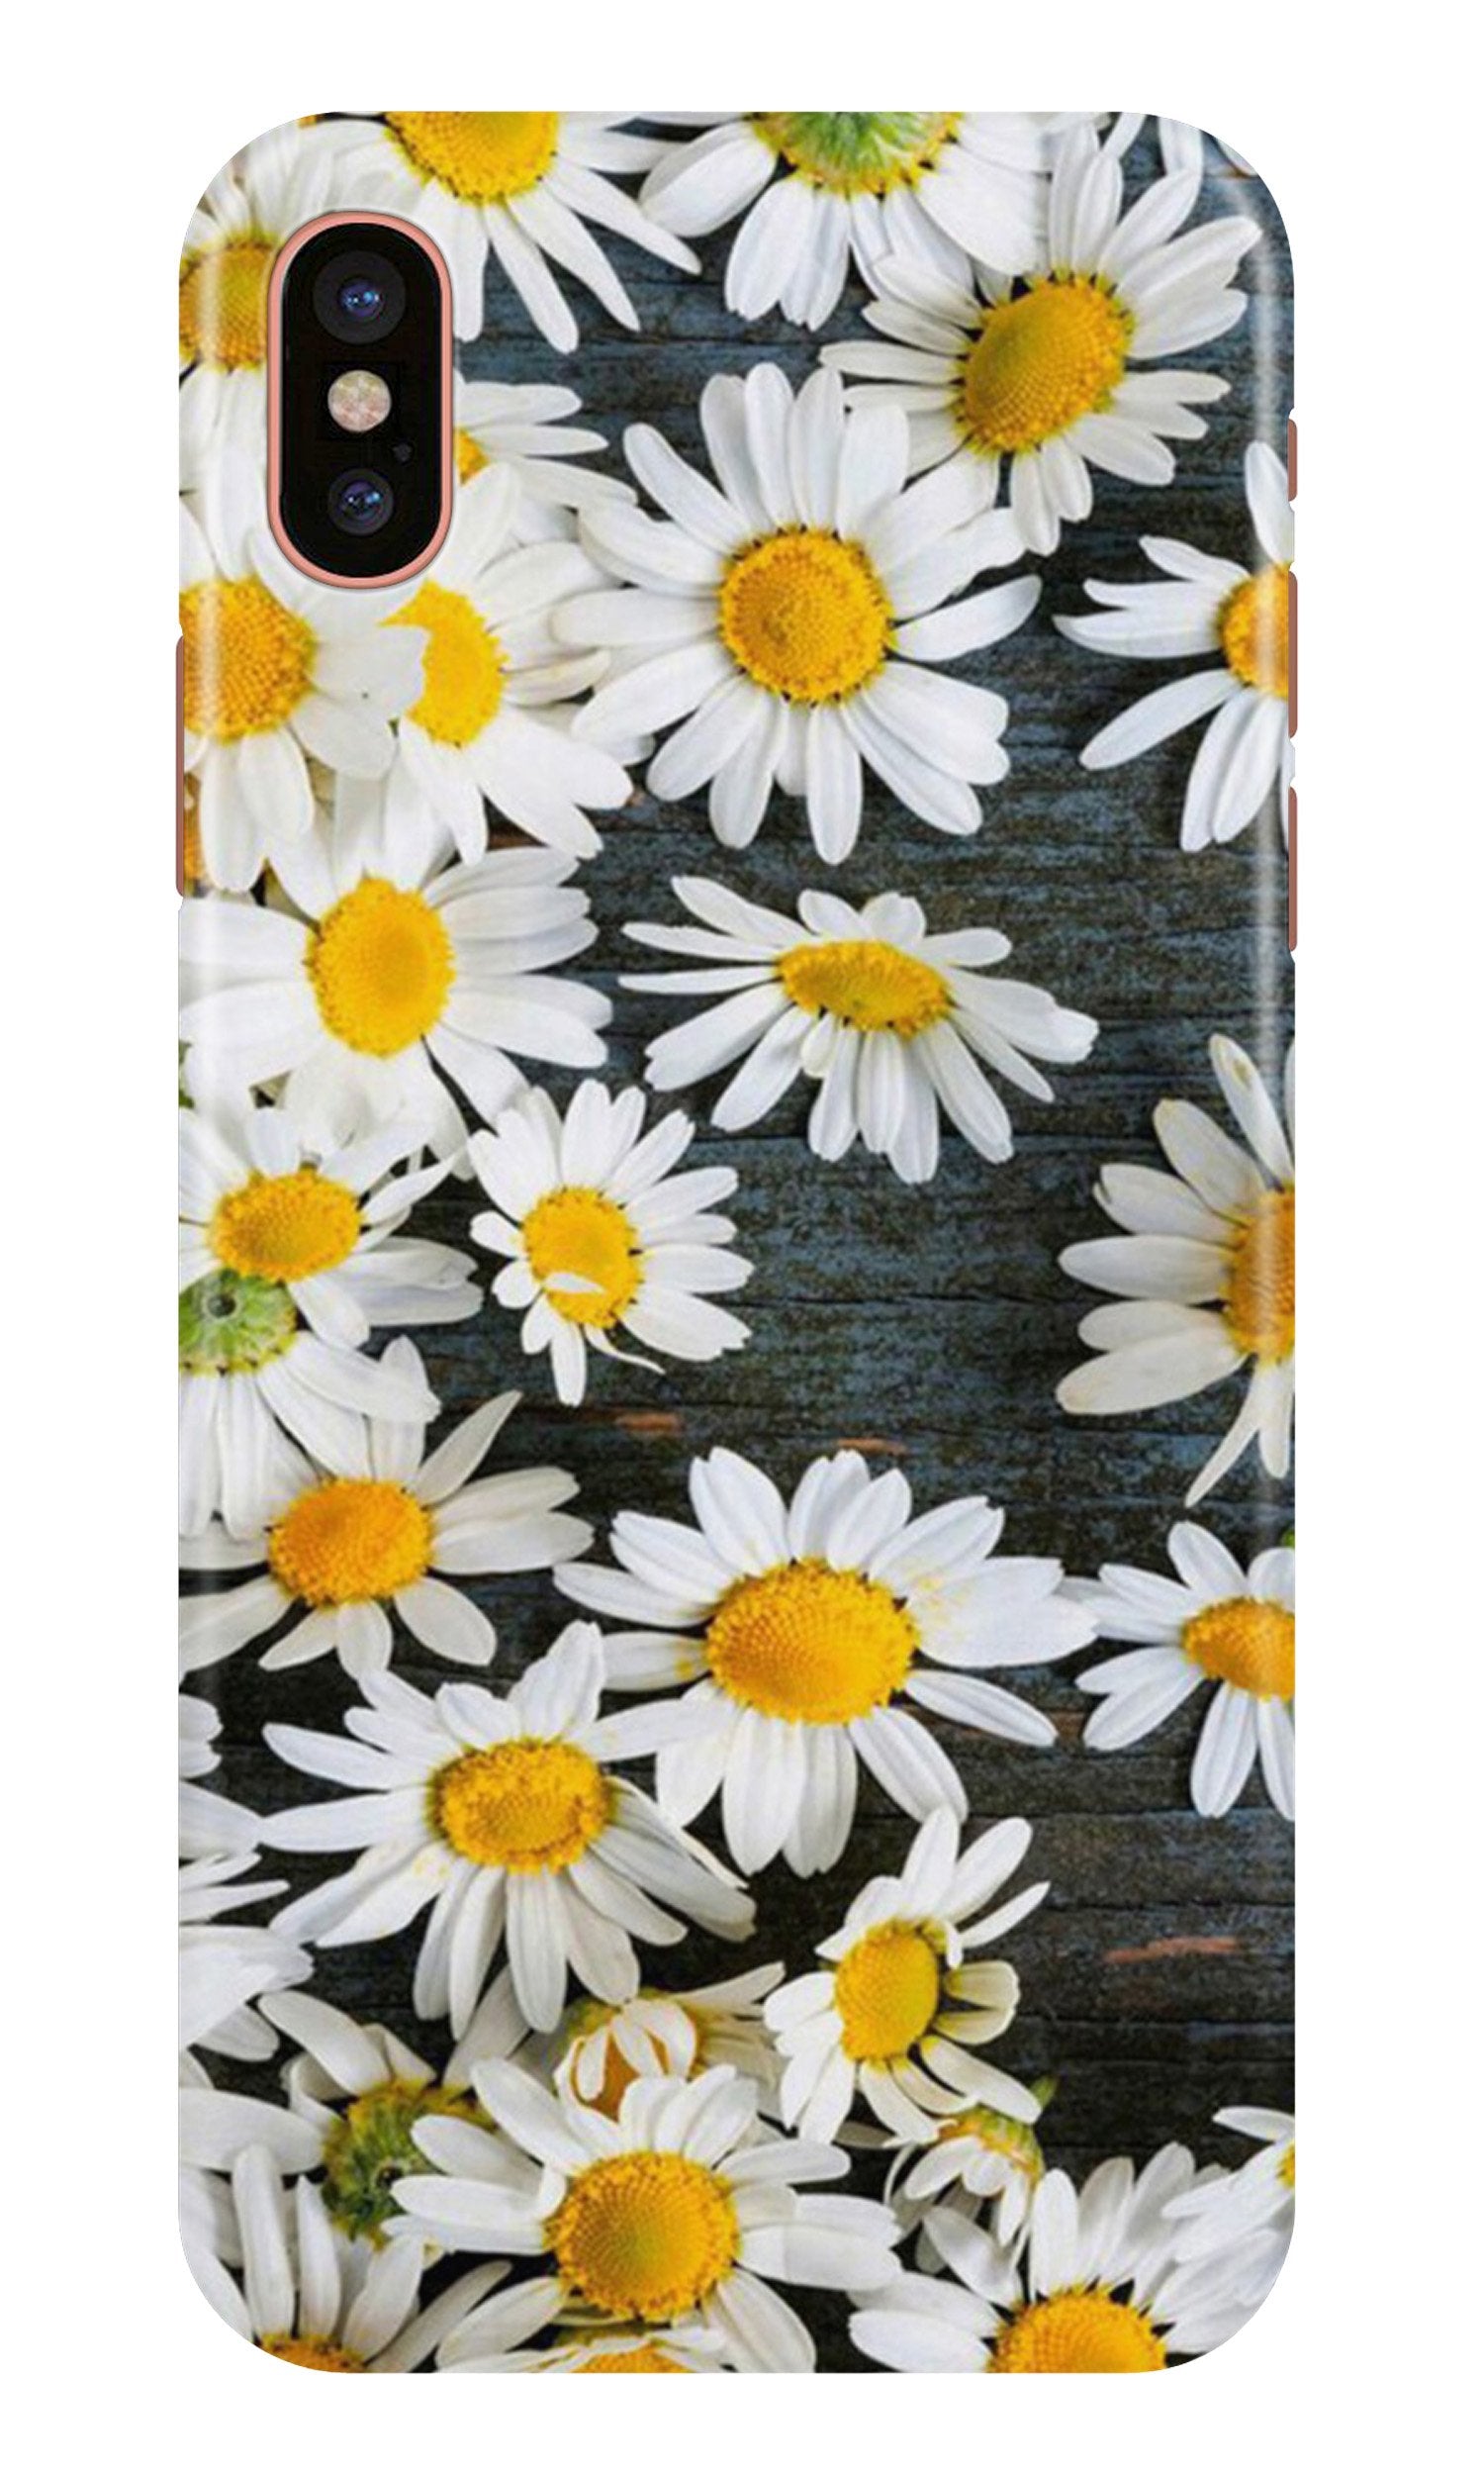 White flowers2 Case for iPhone X